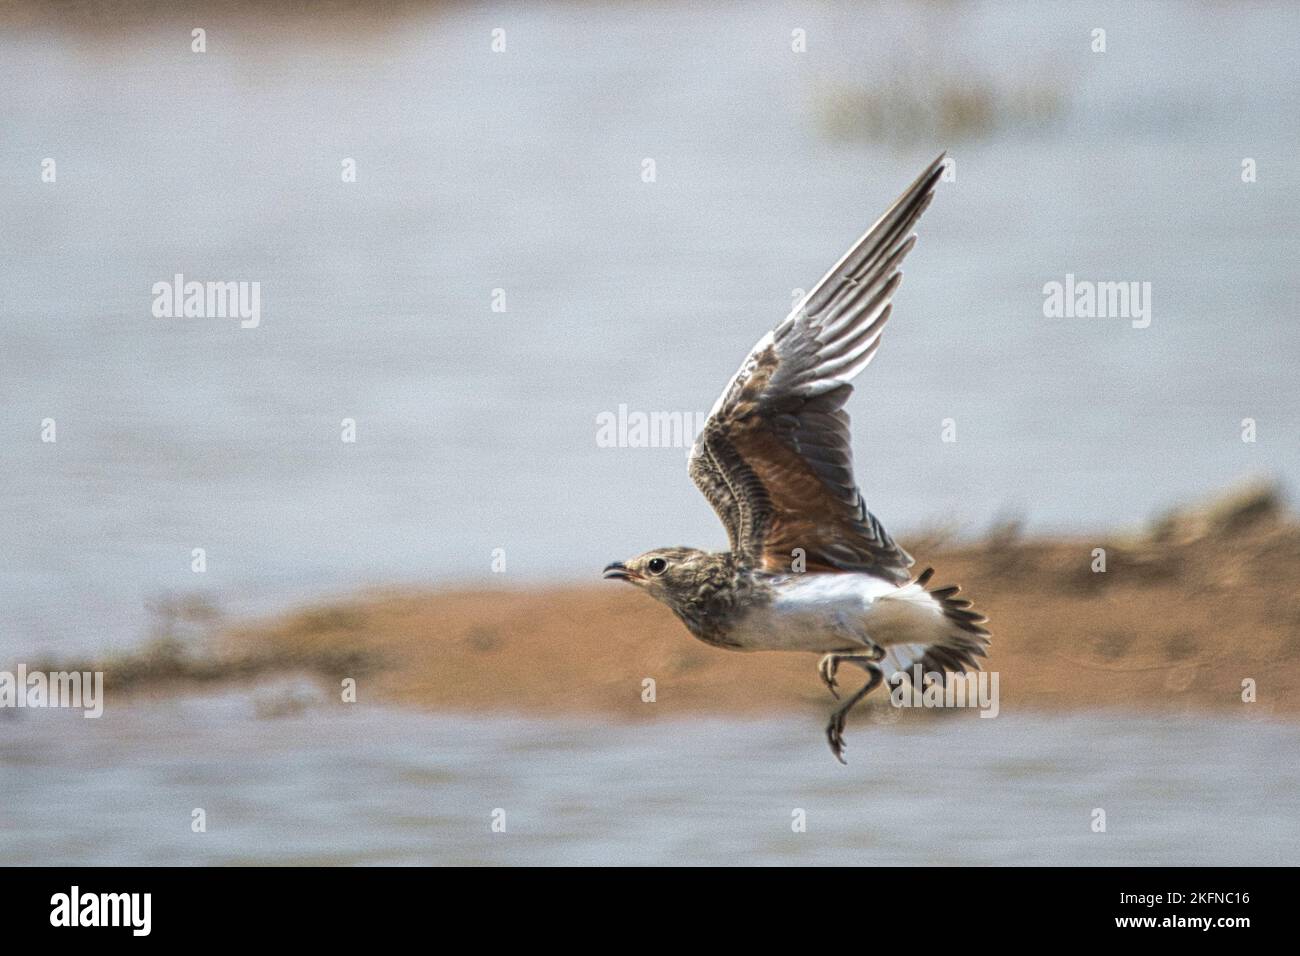 A selective focus shot of a Manx shearwater in a flight eith a lake in the background Stock Photo